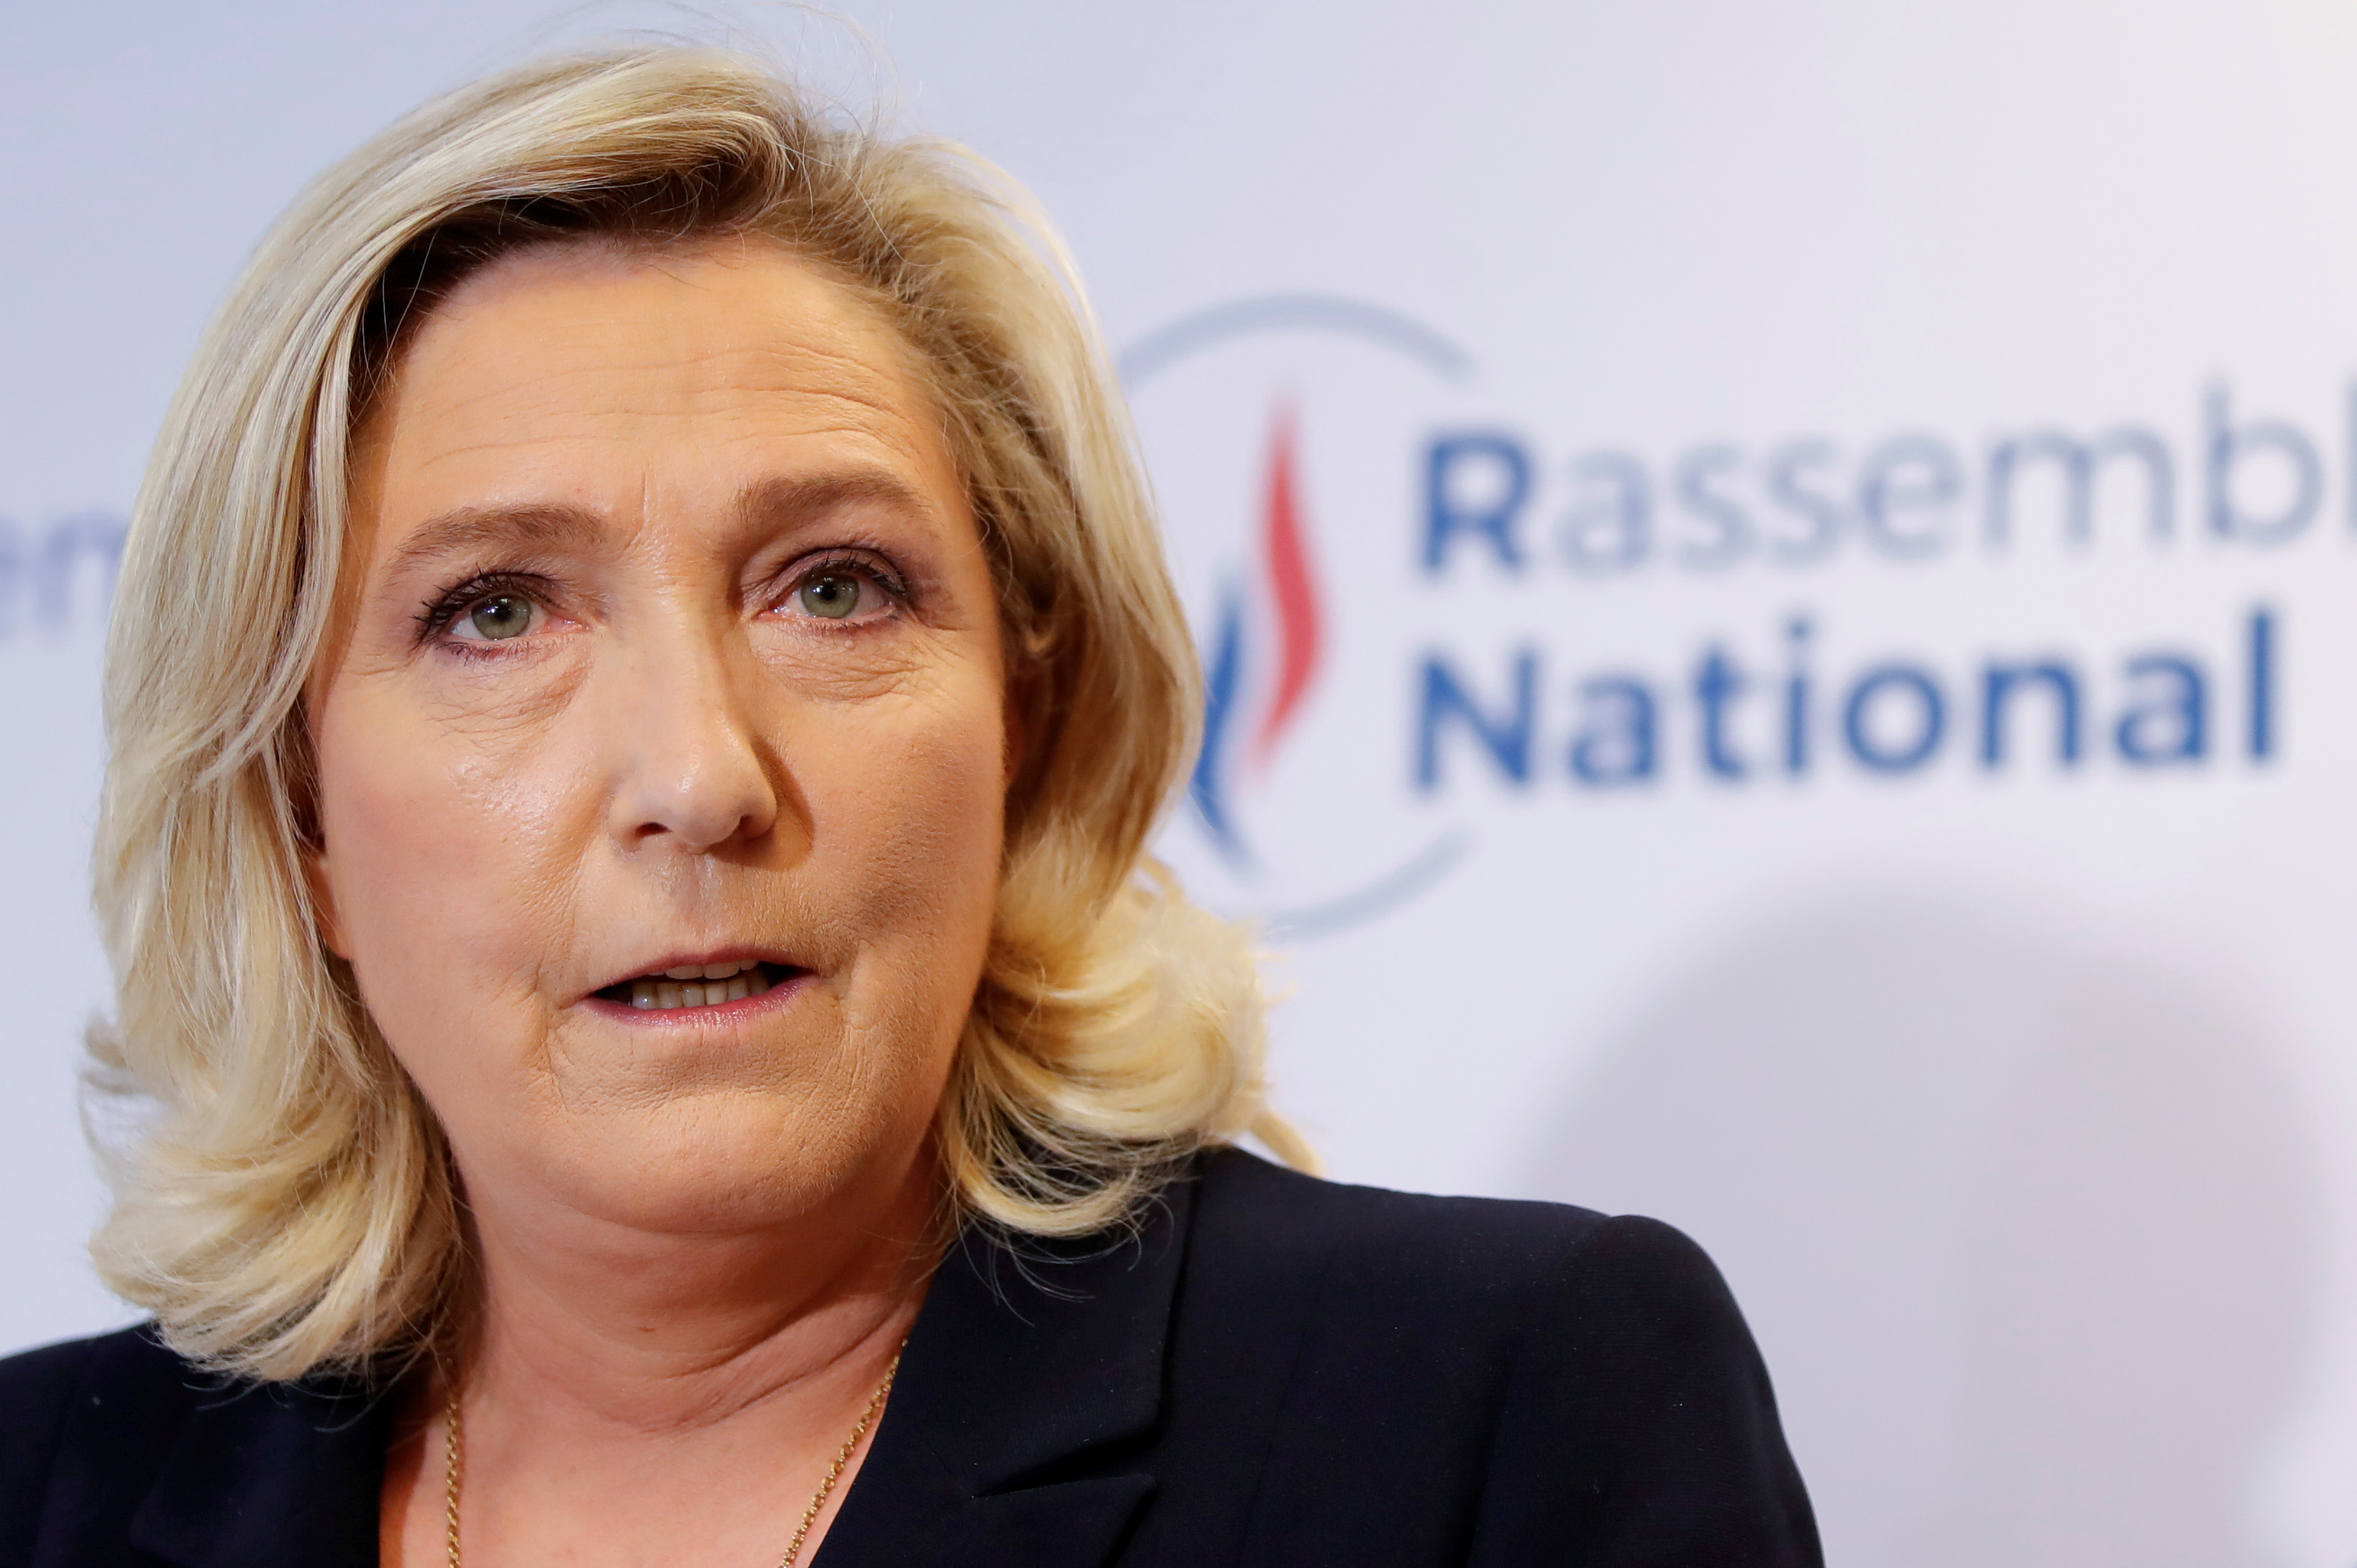 French far-right National Rally (Rassemblement National) party leader Marine Le Pen delivers a speech in reaction to the outcomes of the second round of French regional and departmental elections, in Nanterre, near Paris, France June 27, 2021. REUTERS/Sarah Meyssonnier/File Photo